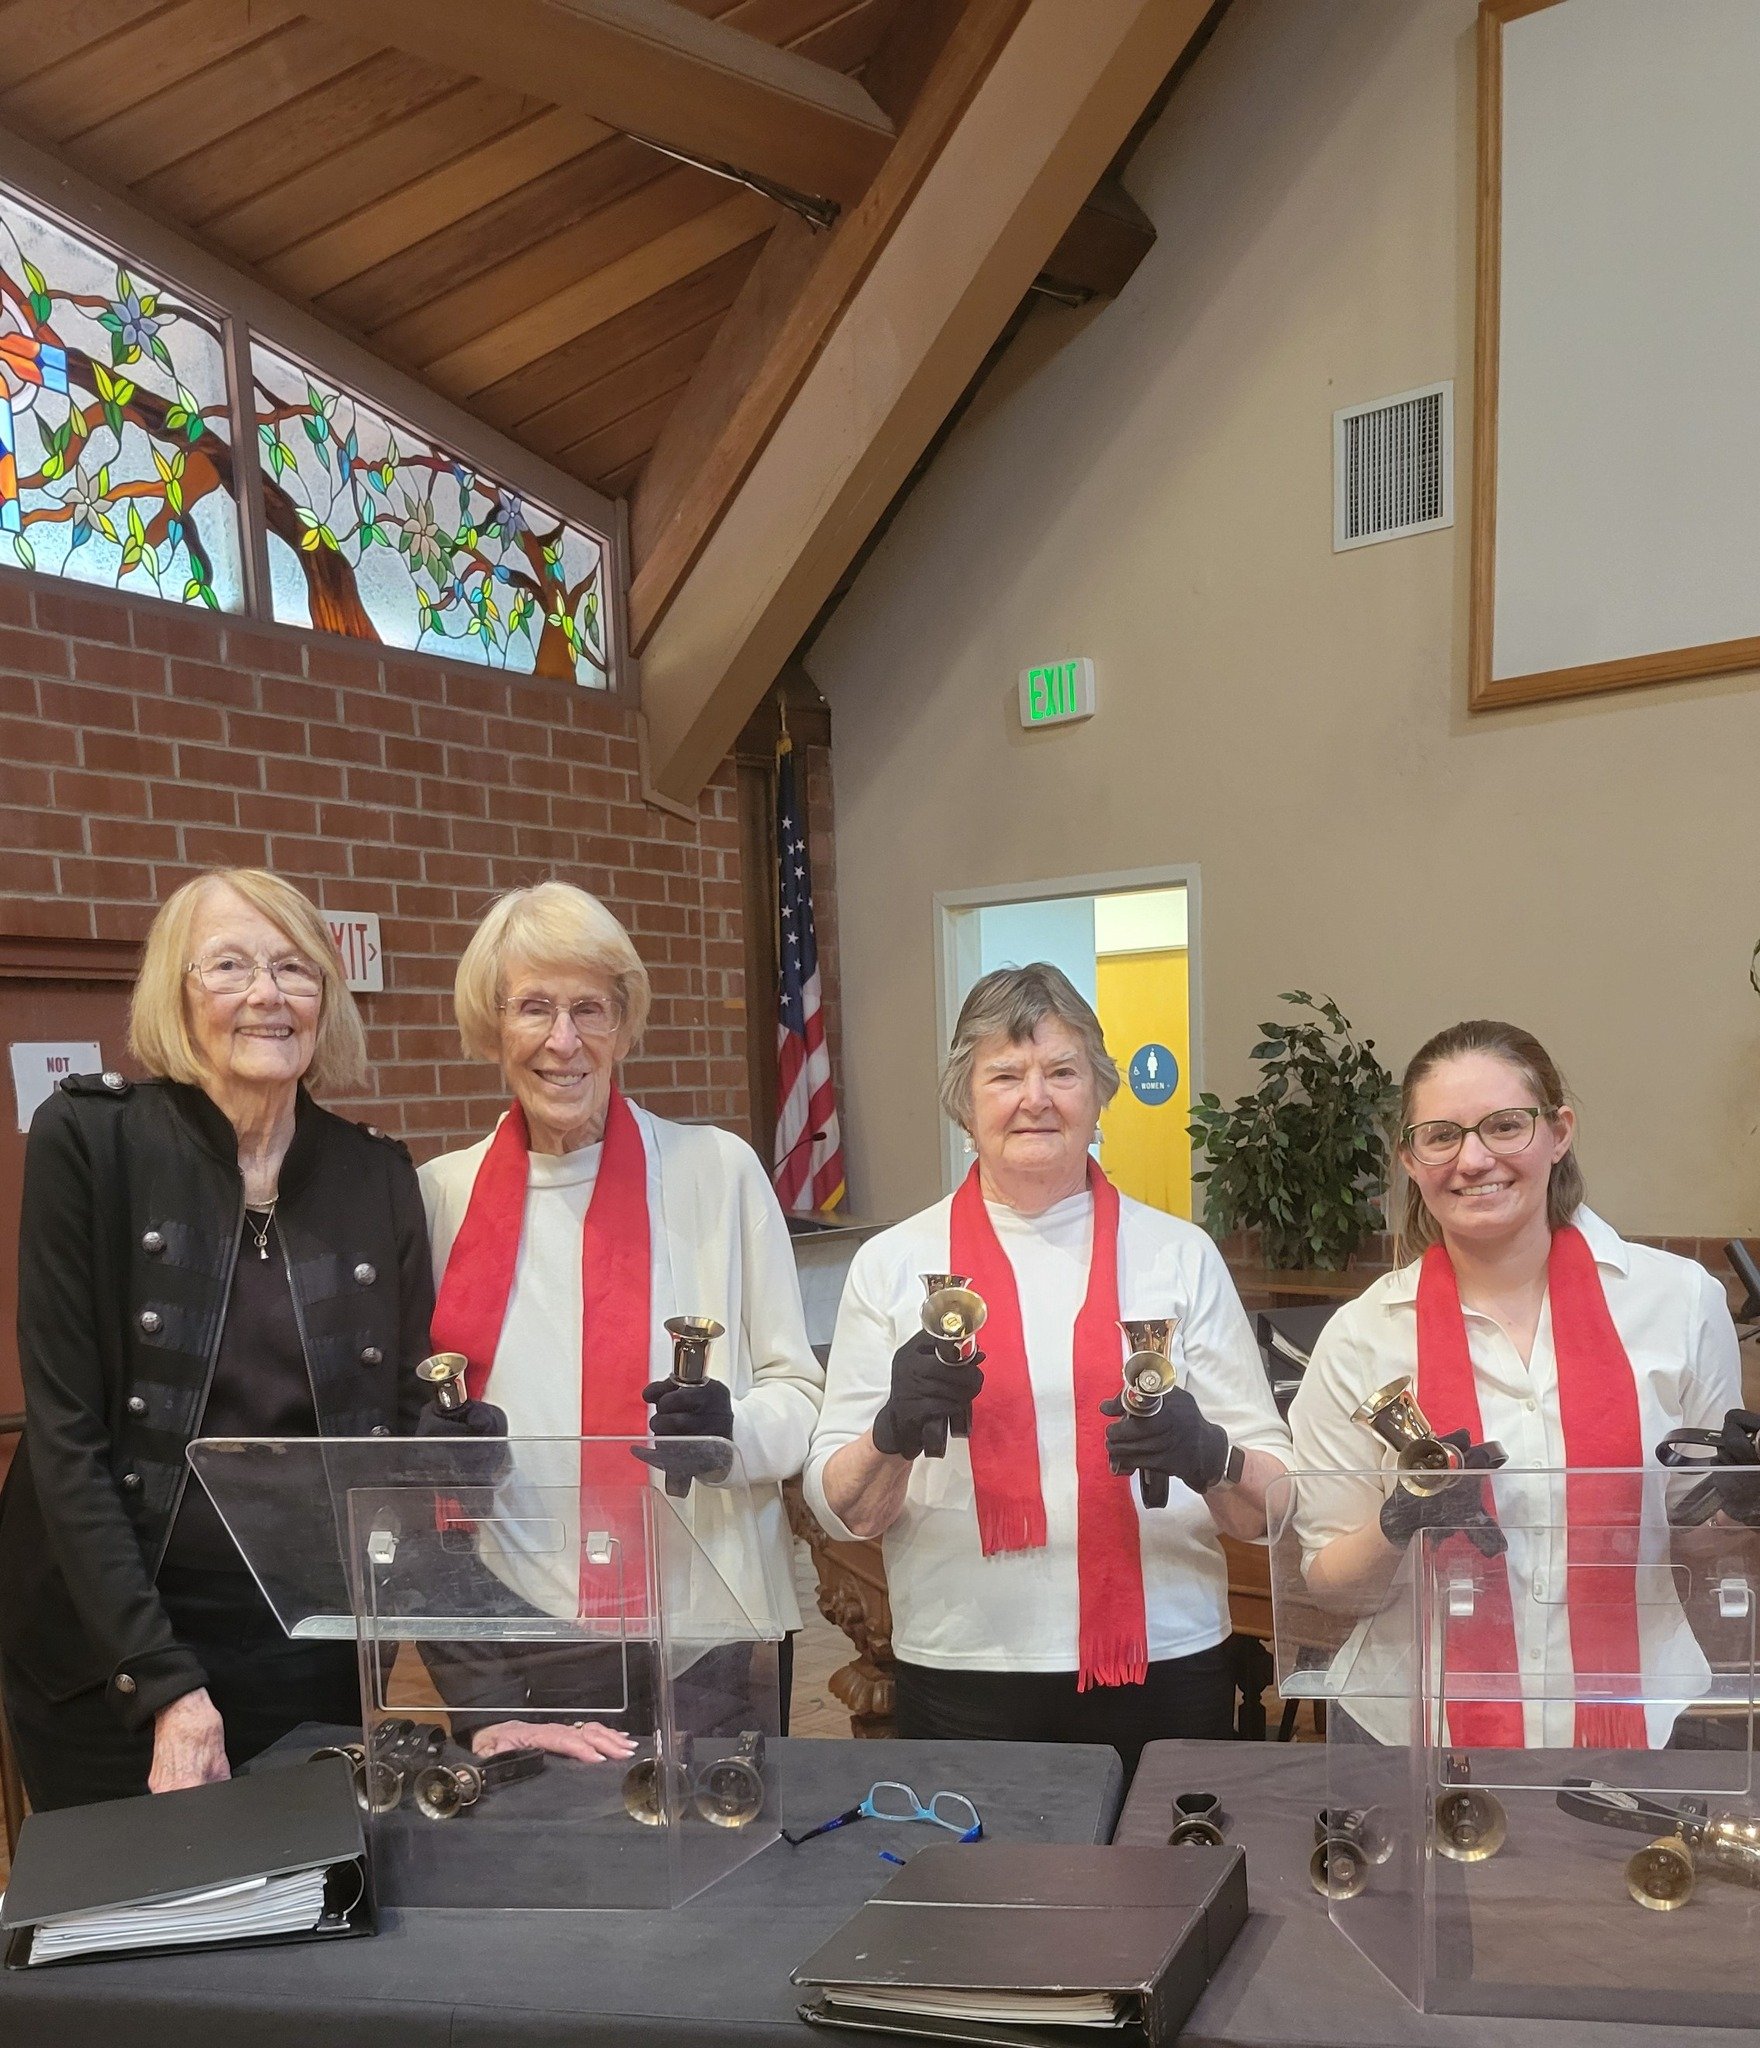 Have you ever thought &ldquo;I wish I could ring bells?&rdquo; Ringing bells is a fun, enjoyable way to create music and be part of a musical community. All musical abilities and ages are welcome. Joycelyn, on the right, started ringing at age 7 and 